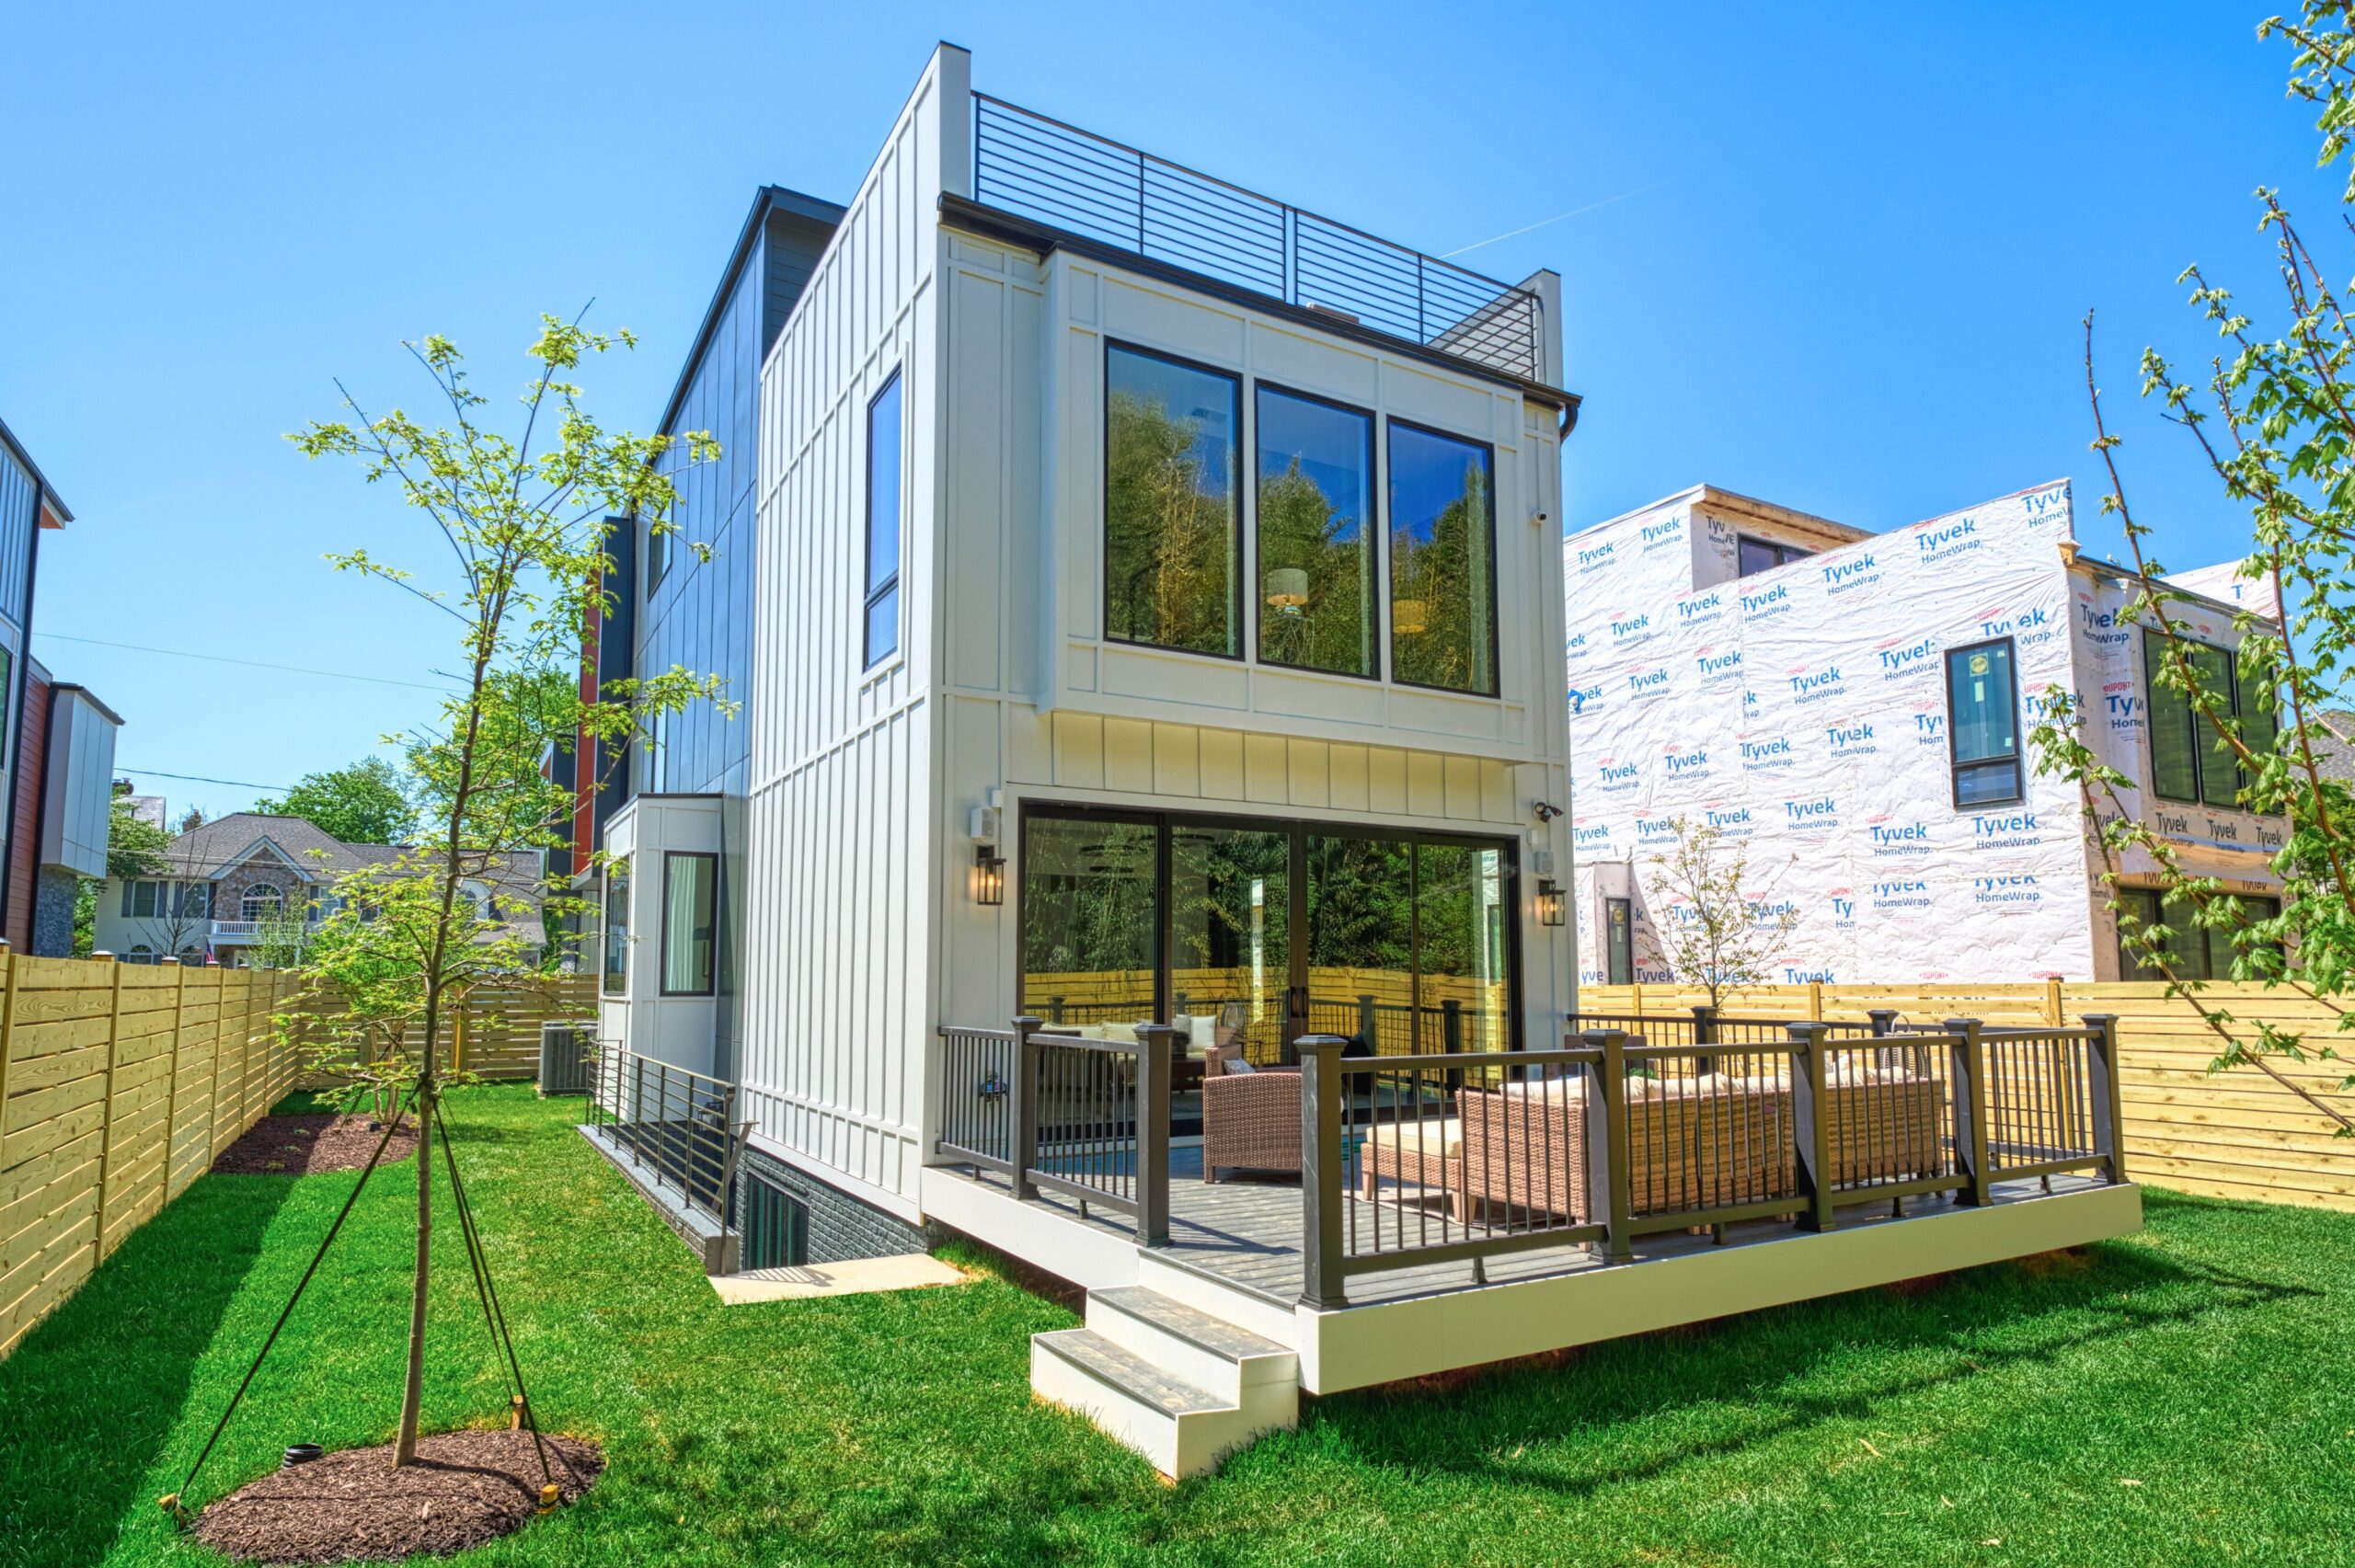 Professional exterior photo of 1137 Buchanan St in McLean, VA - showing the rear view of a brand new construction modern home with a ground level floating deck and rooftop deck